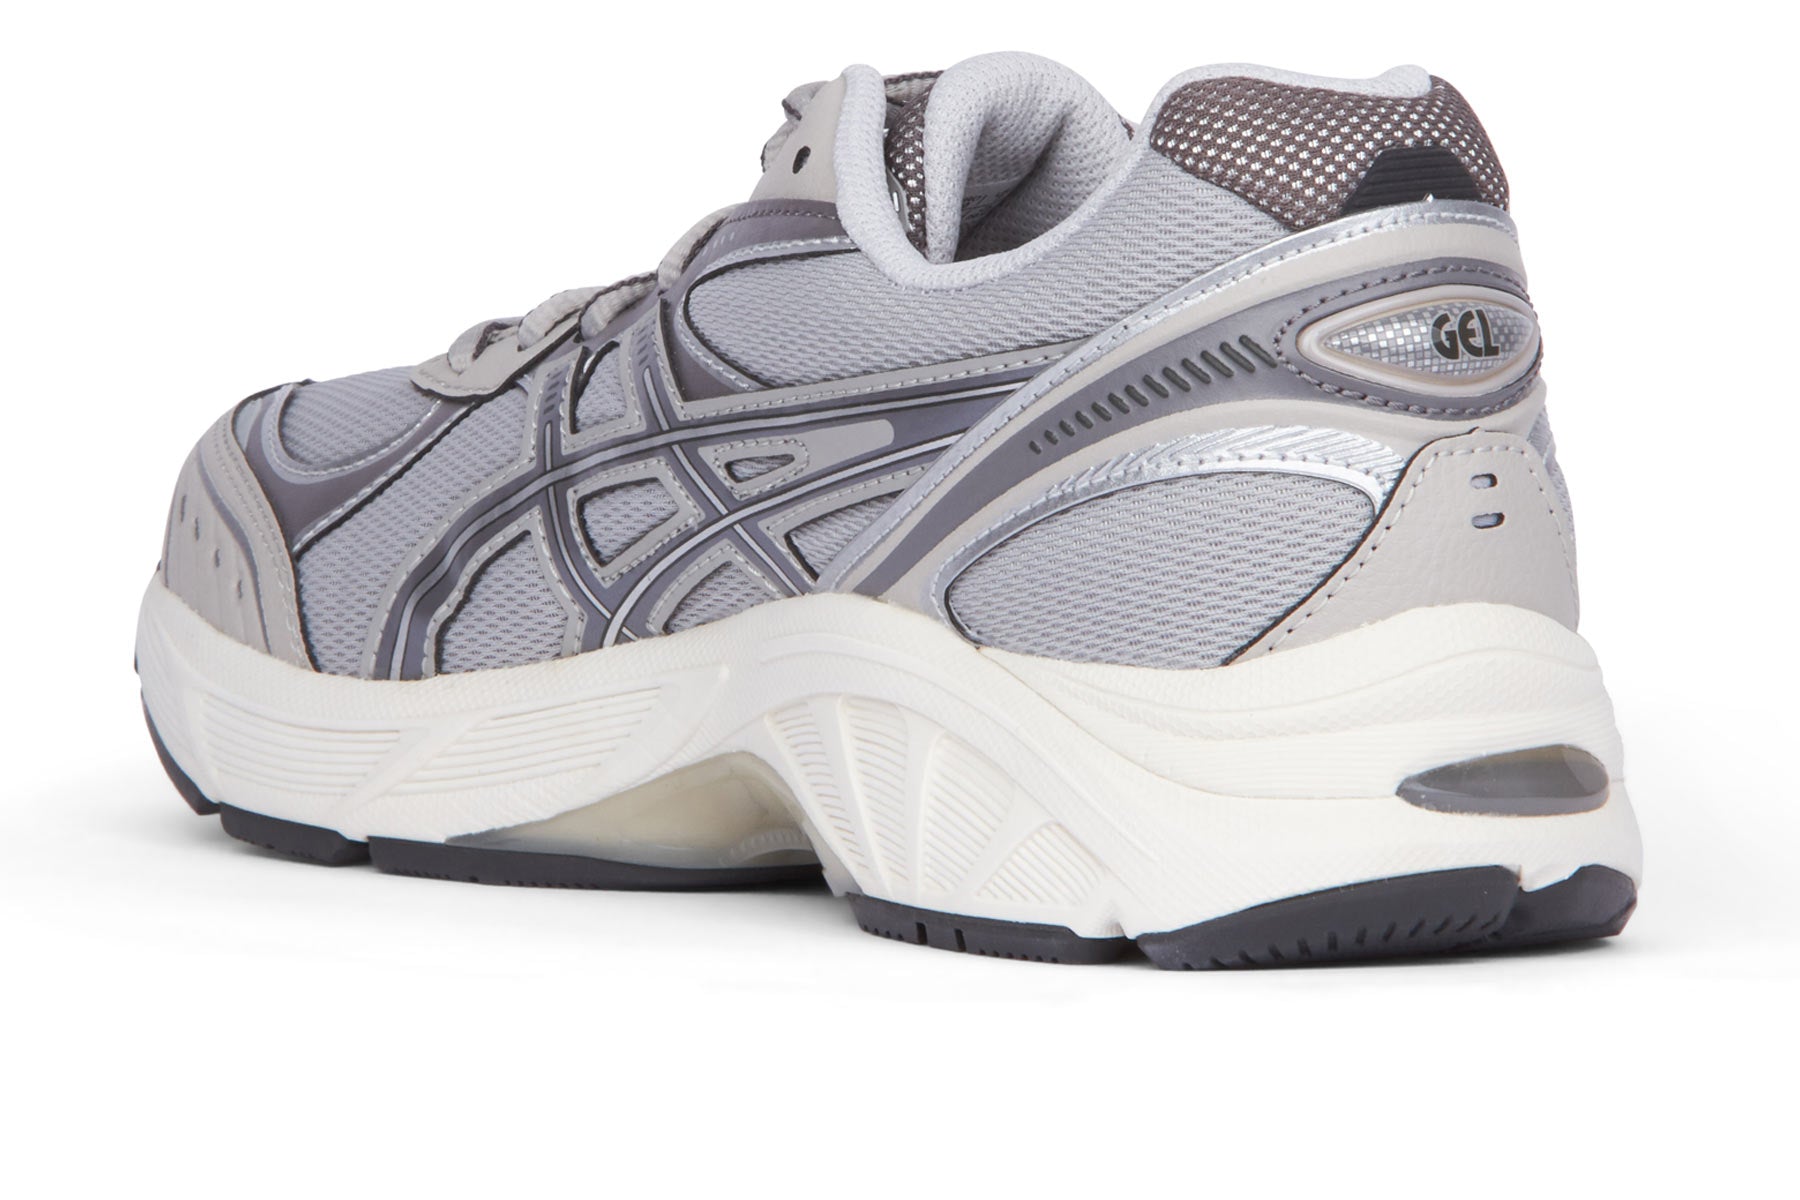 Asics GT 2160 - Oyster Grey/Carbon